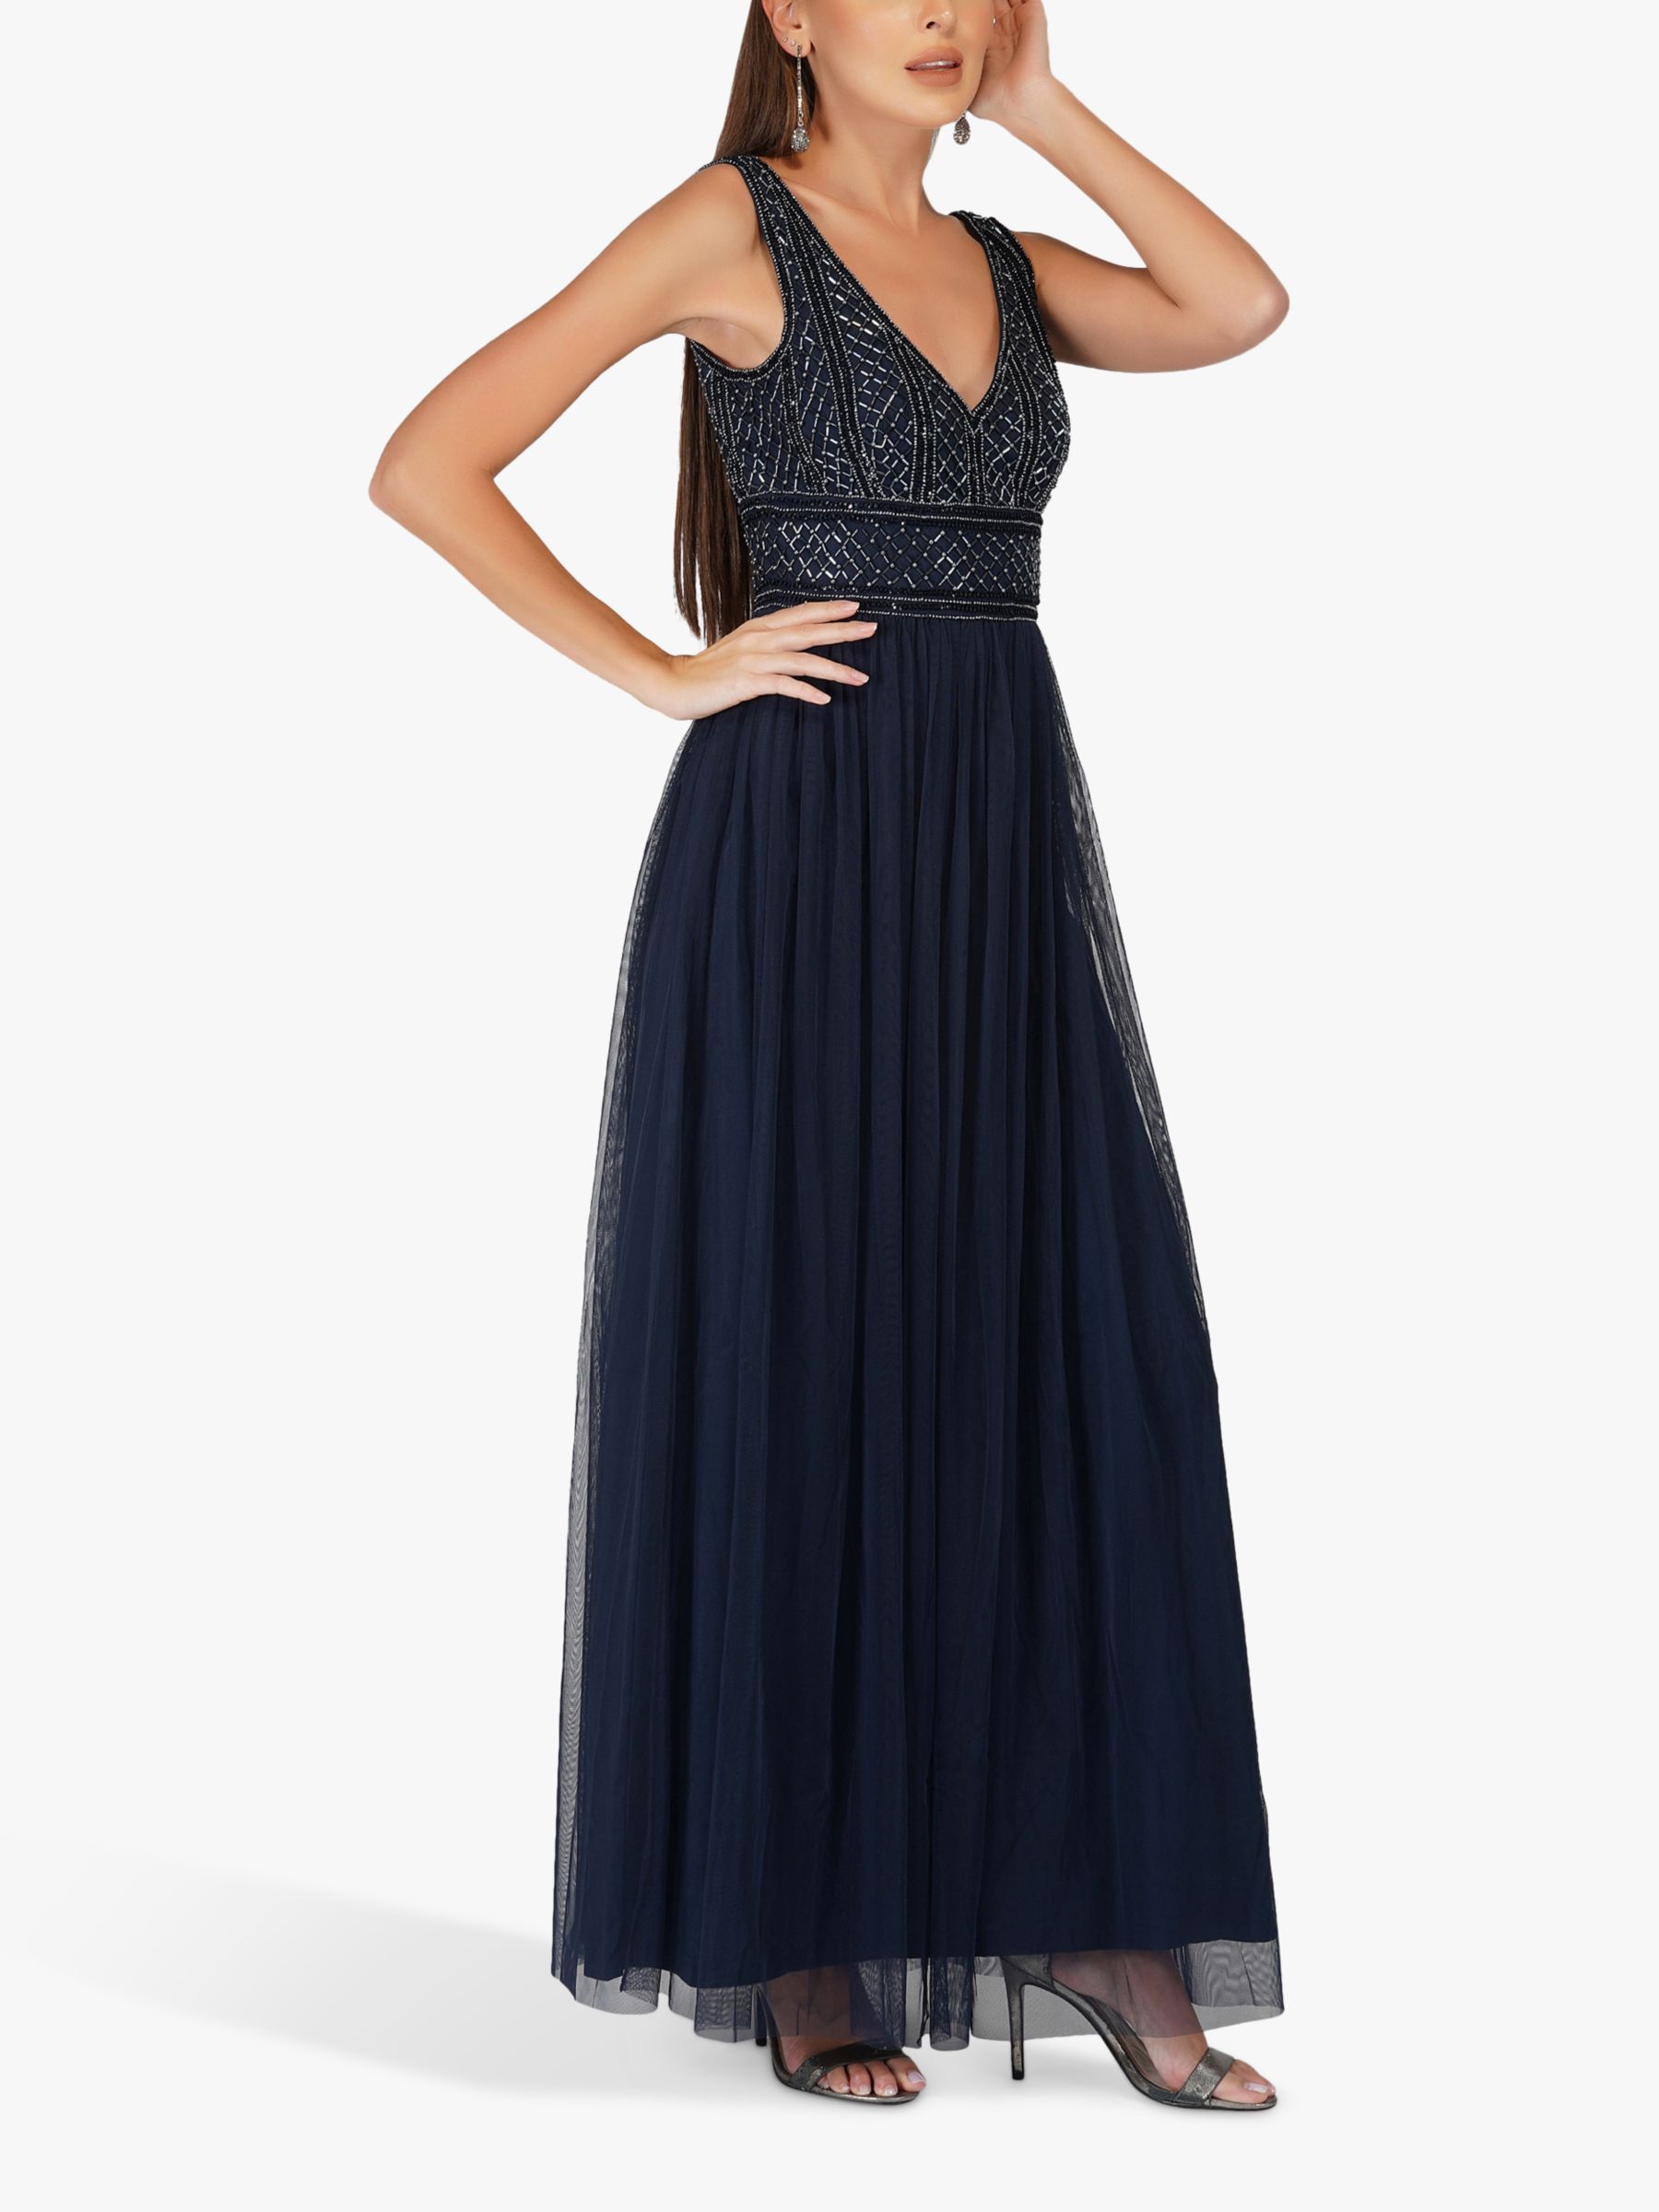 Buy Lace & Beads New Mulan Maxi Online at johnlewis.com